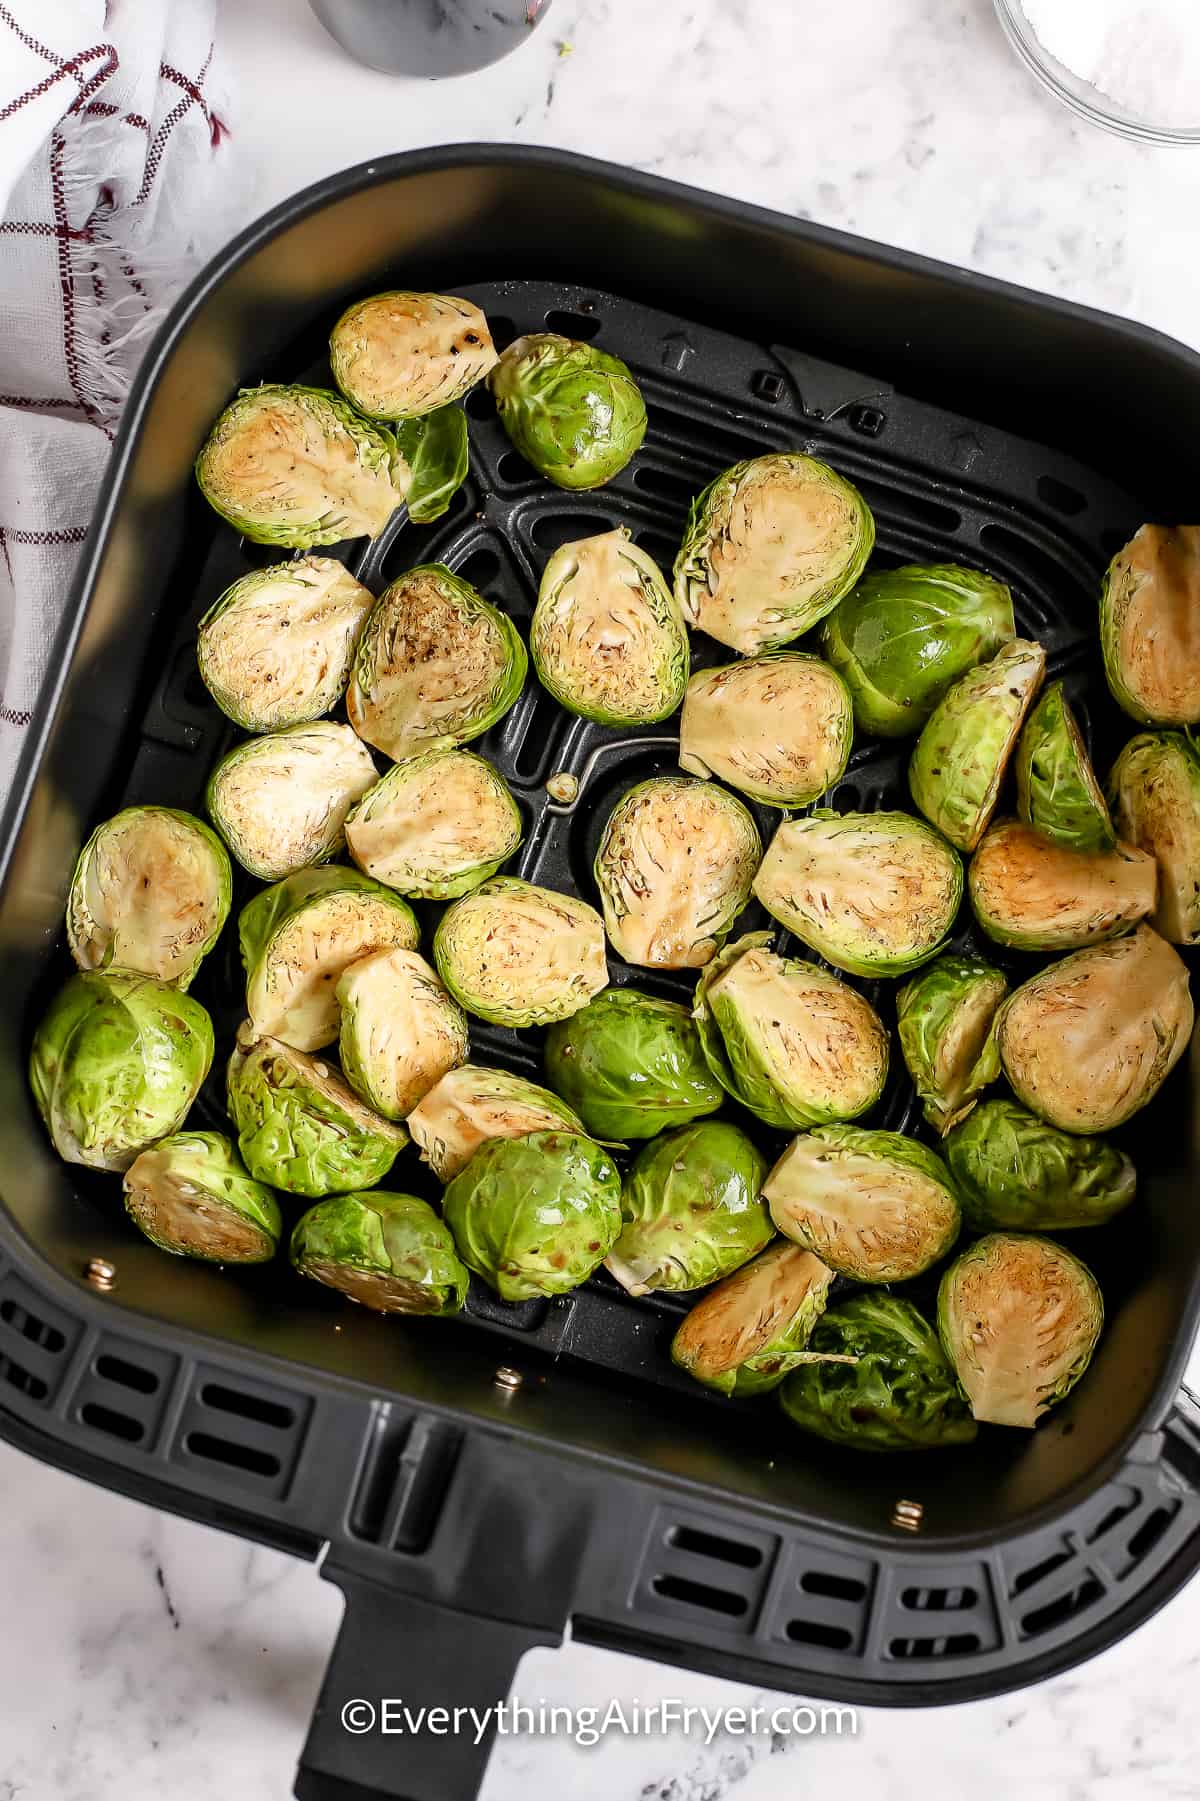 uncooked brussels sprouts in an air fryer tray